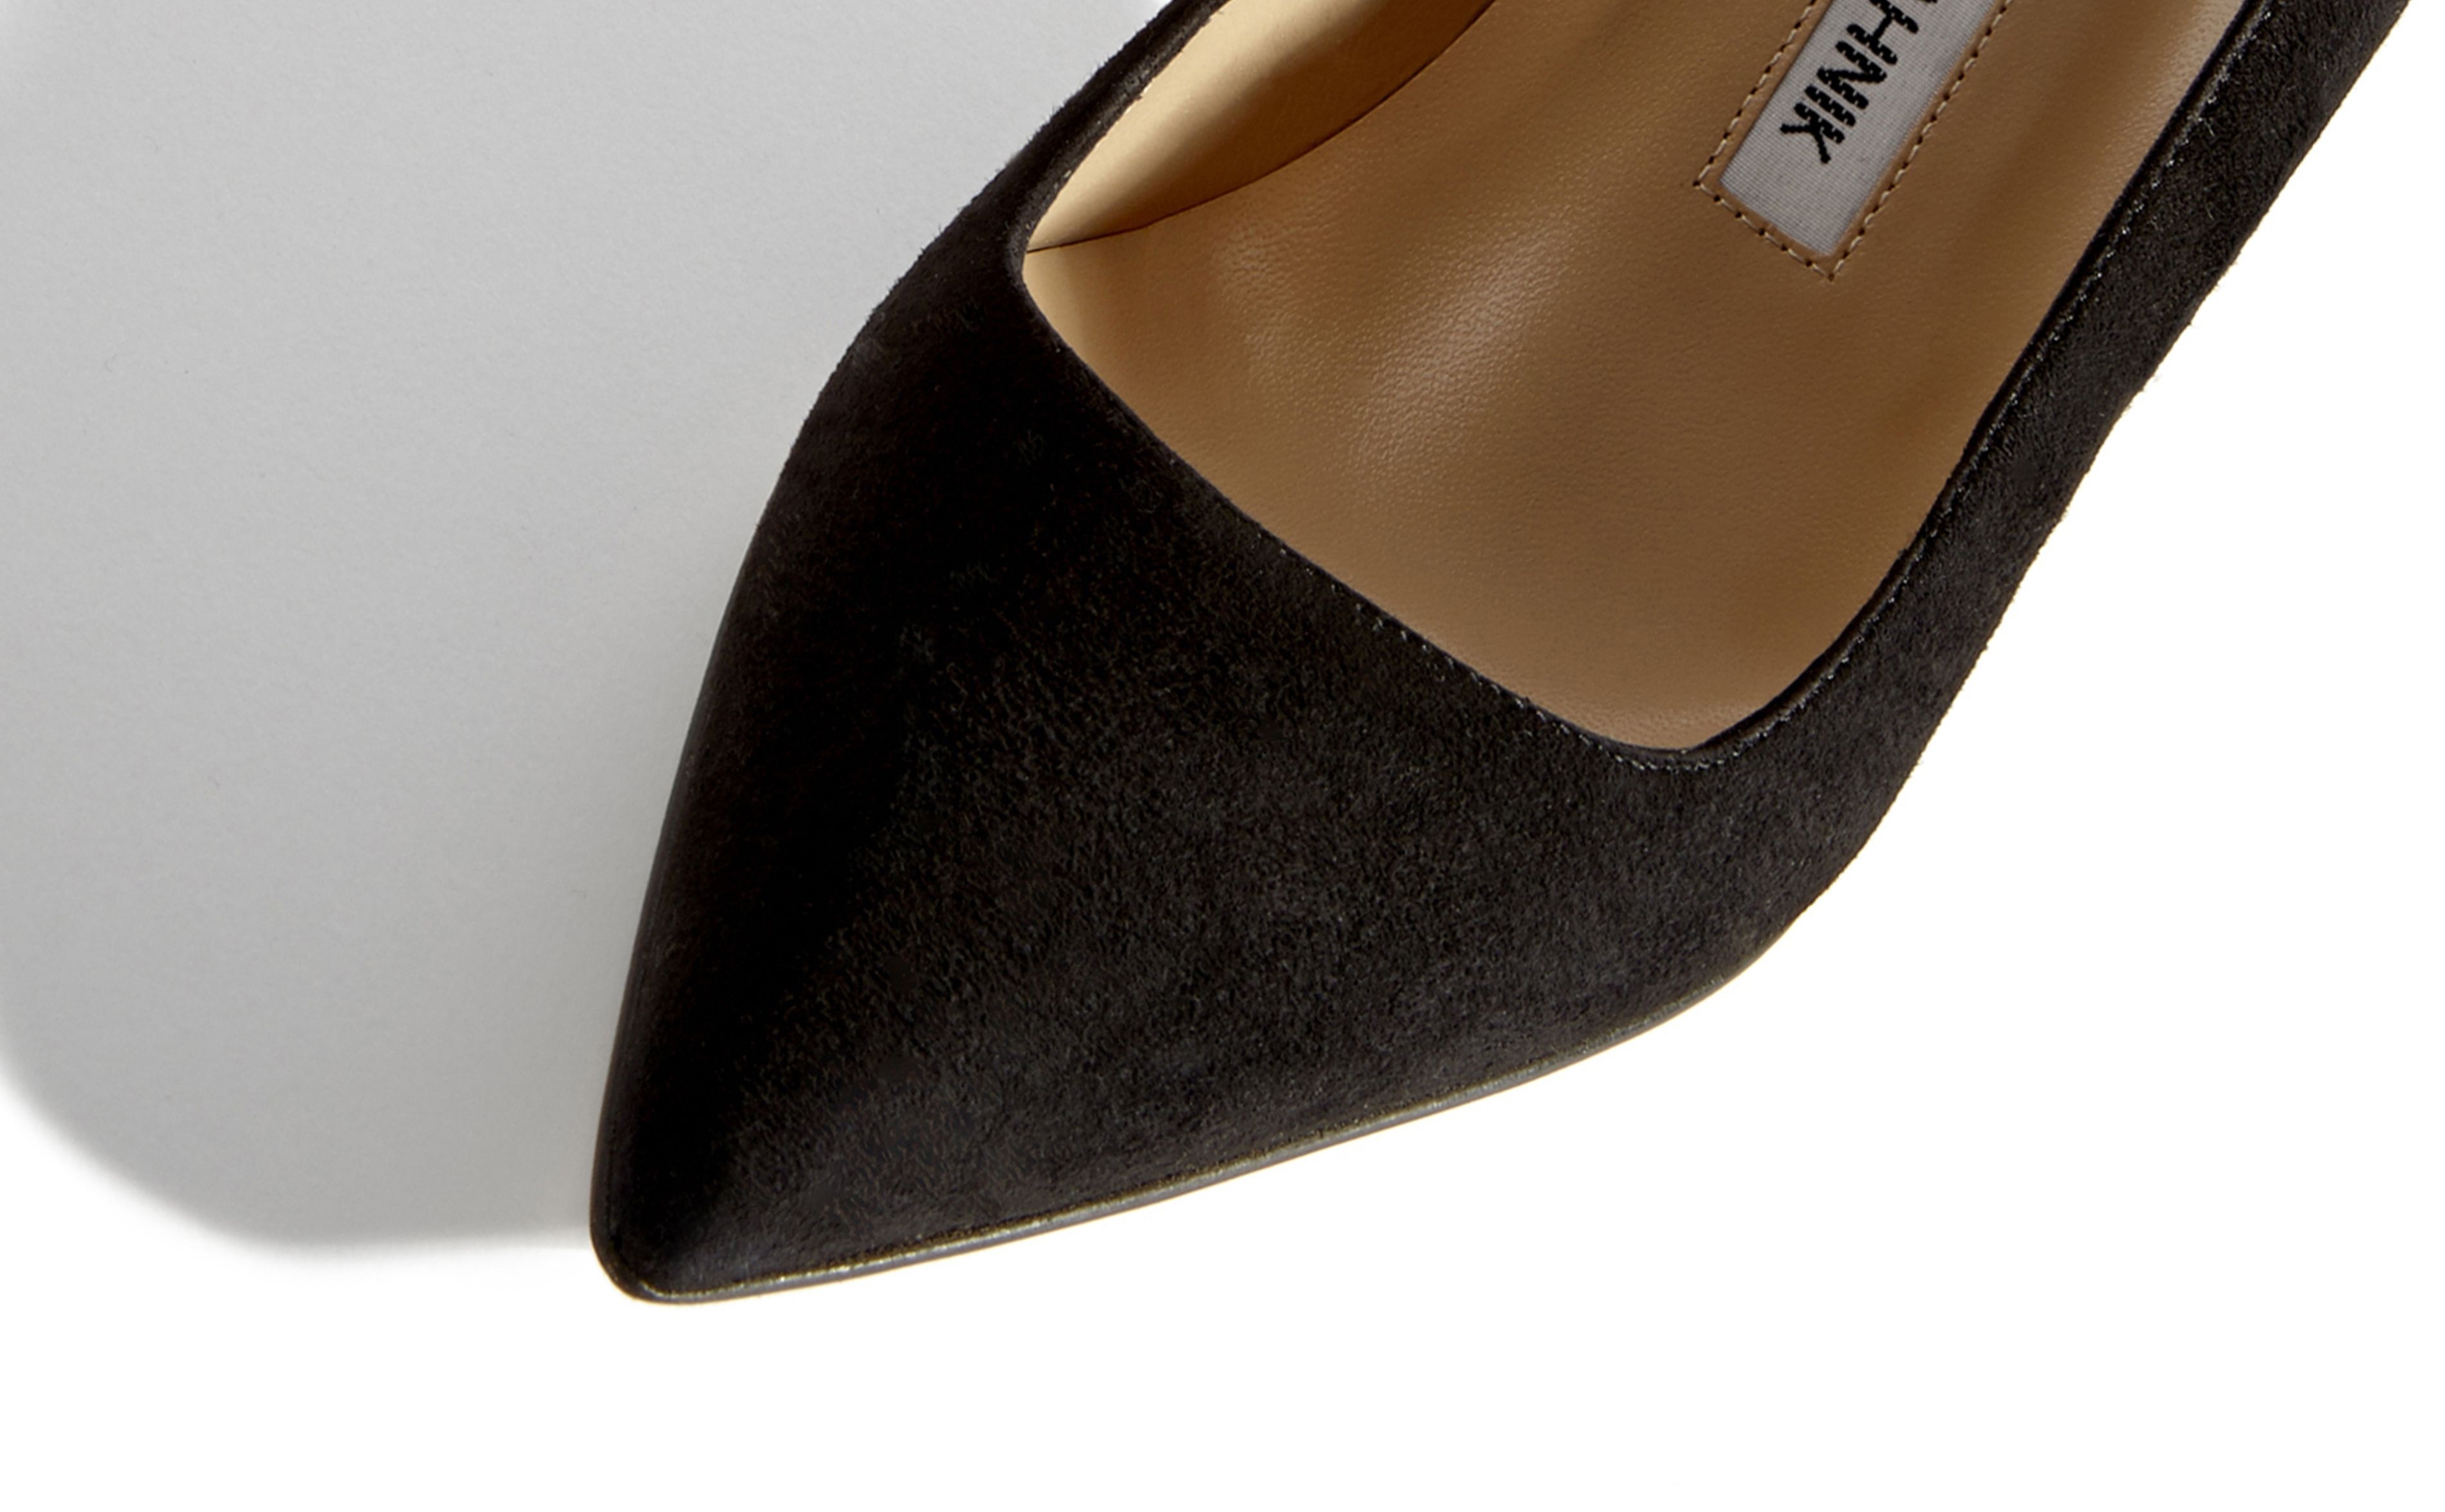 Black Suede Pointed Toe Pumps - 4